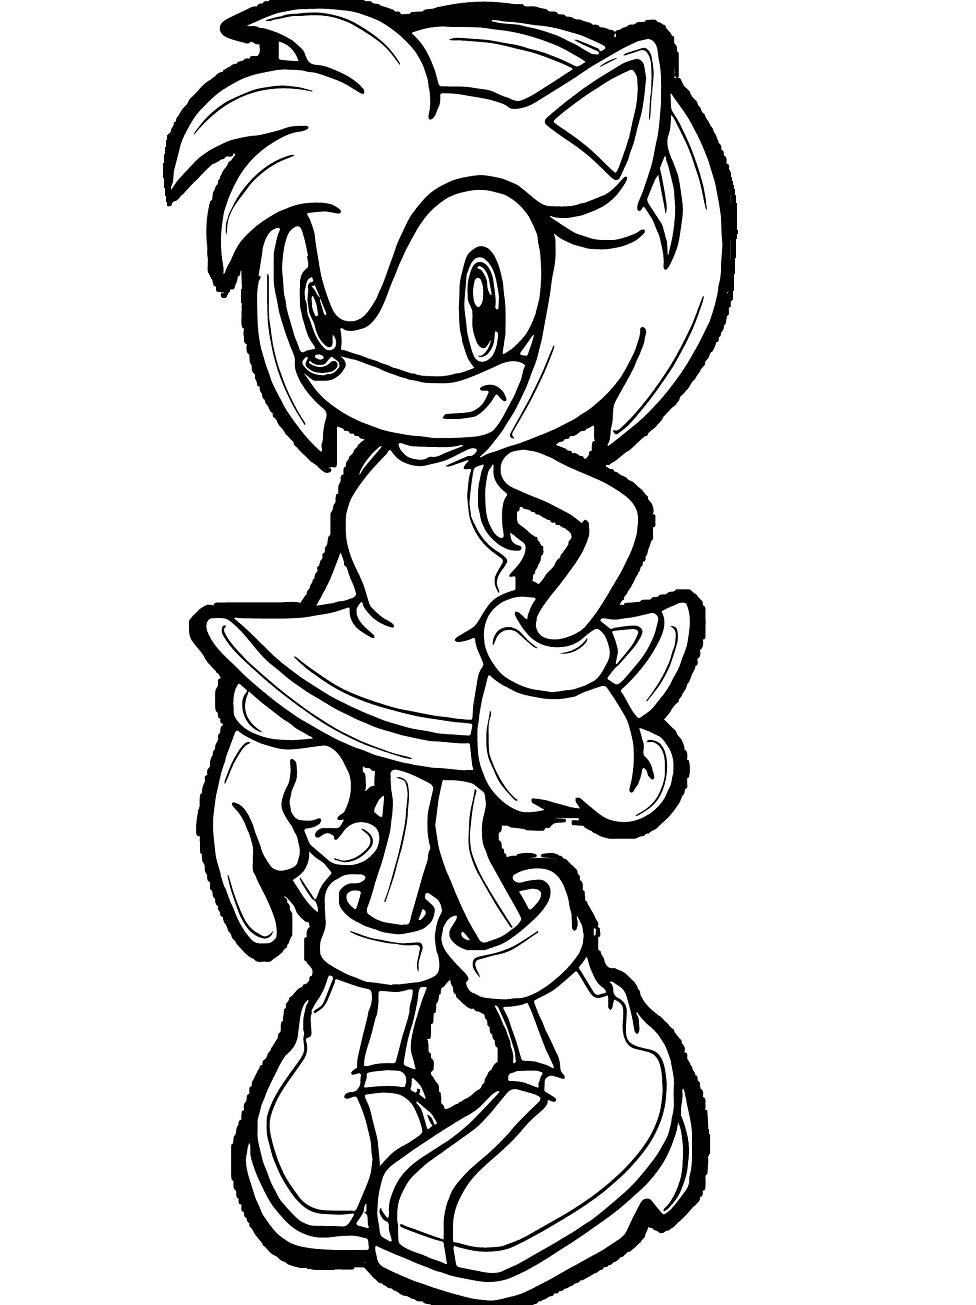 Amy Rose in Sonic Coloring Page